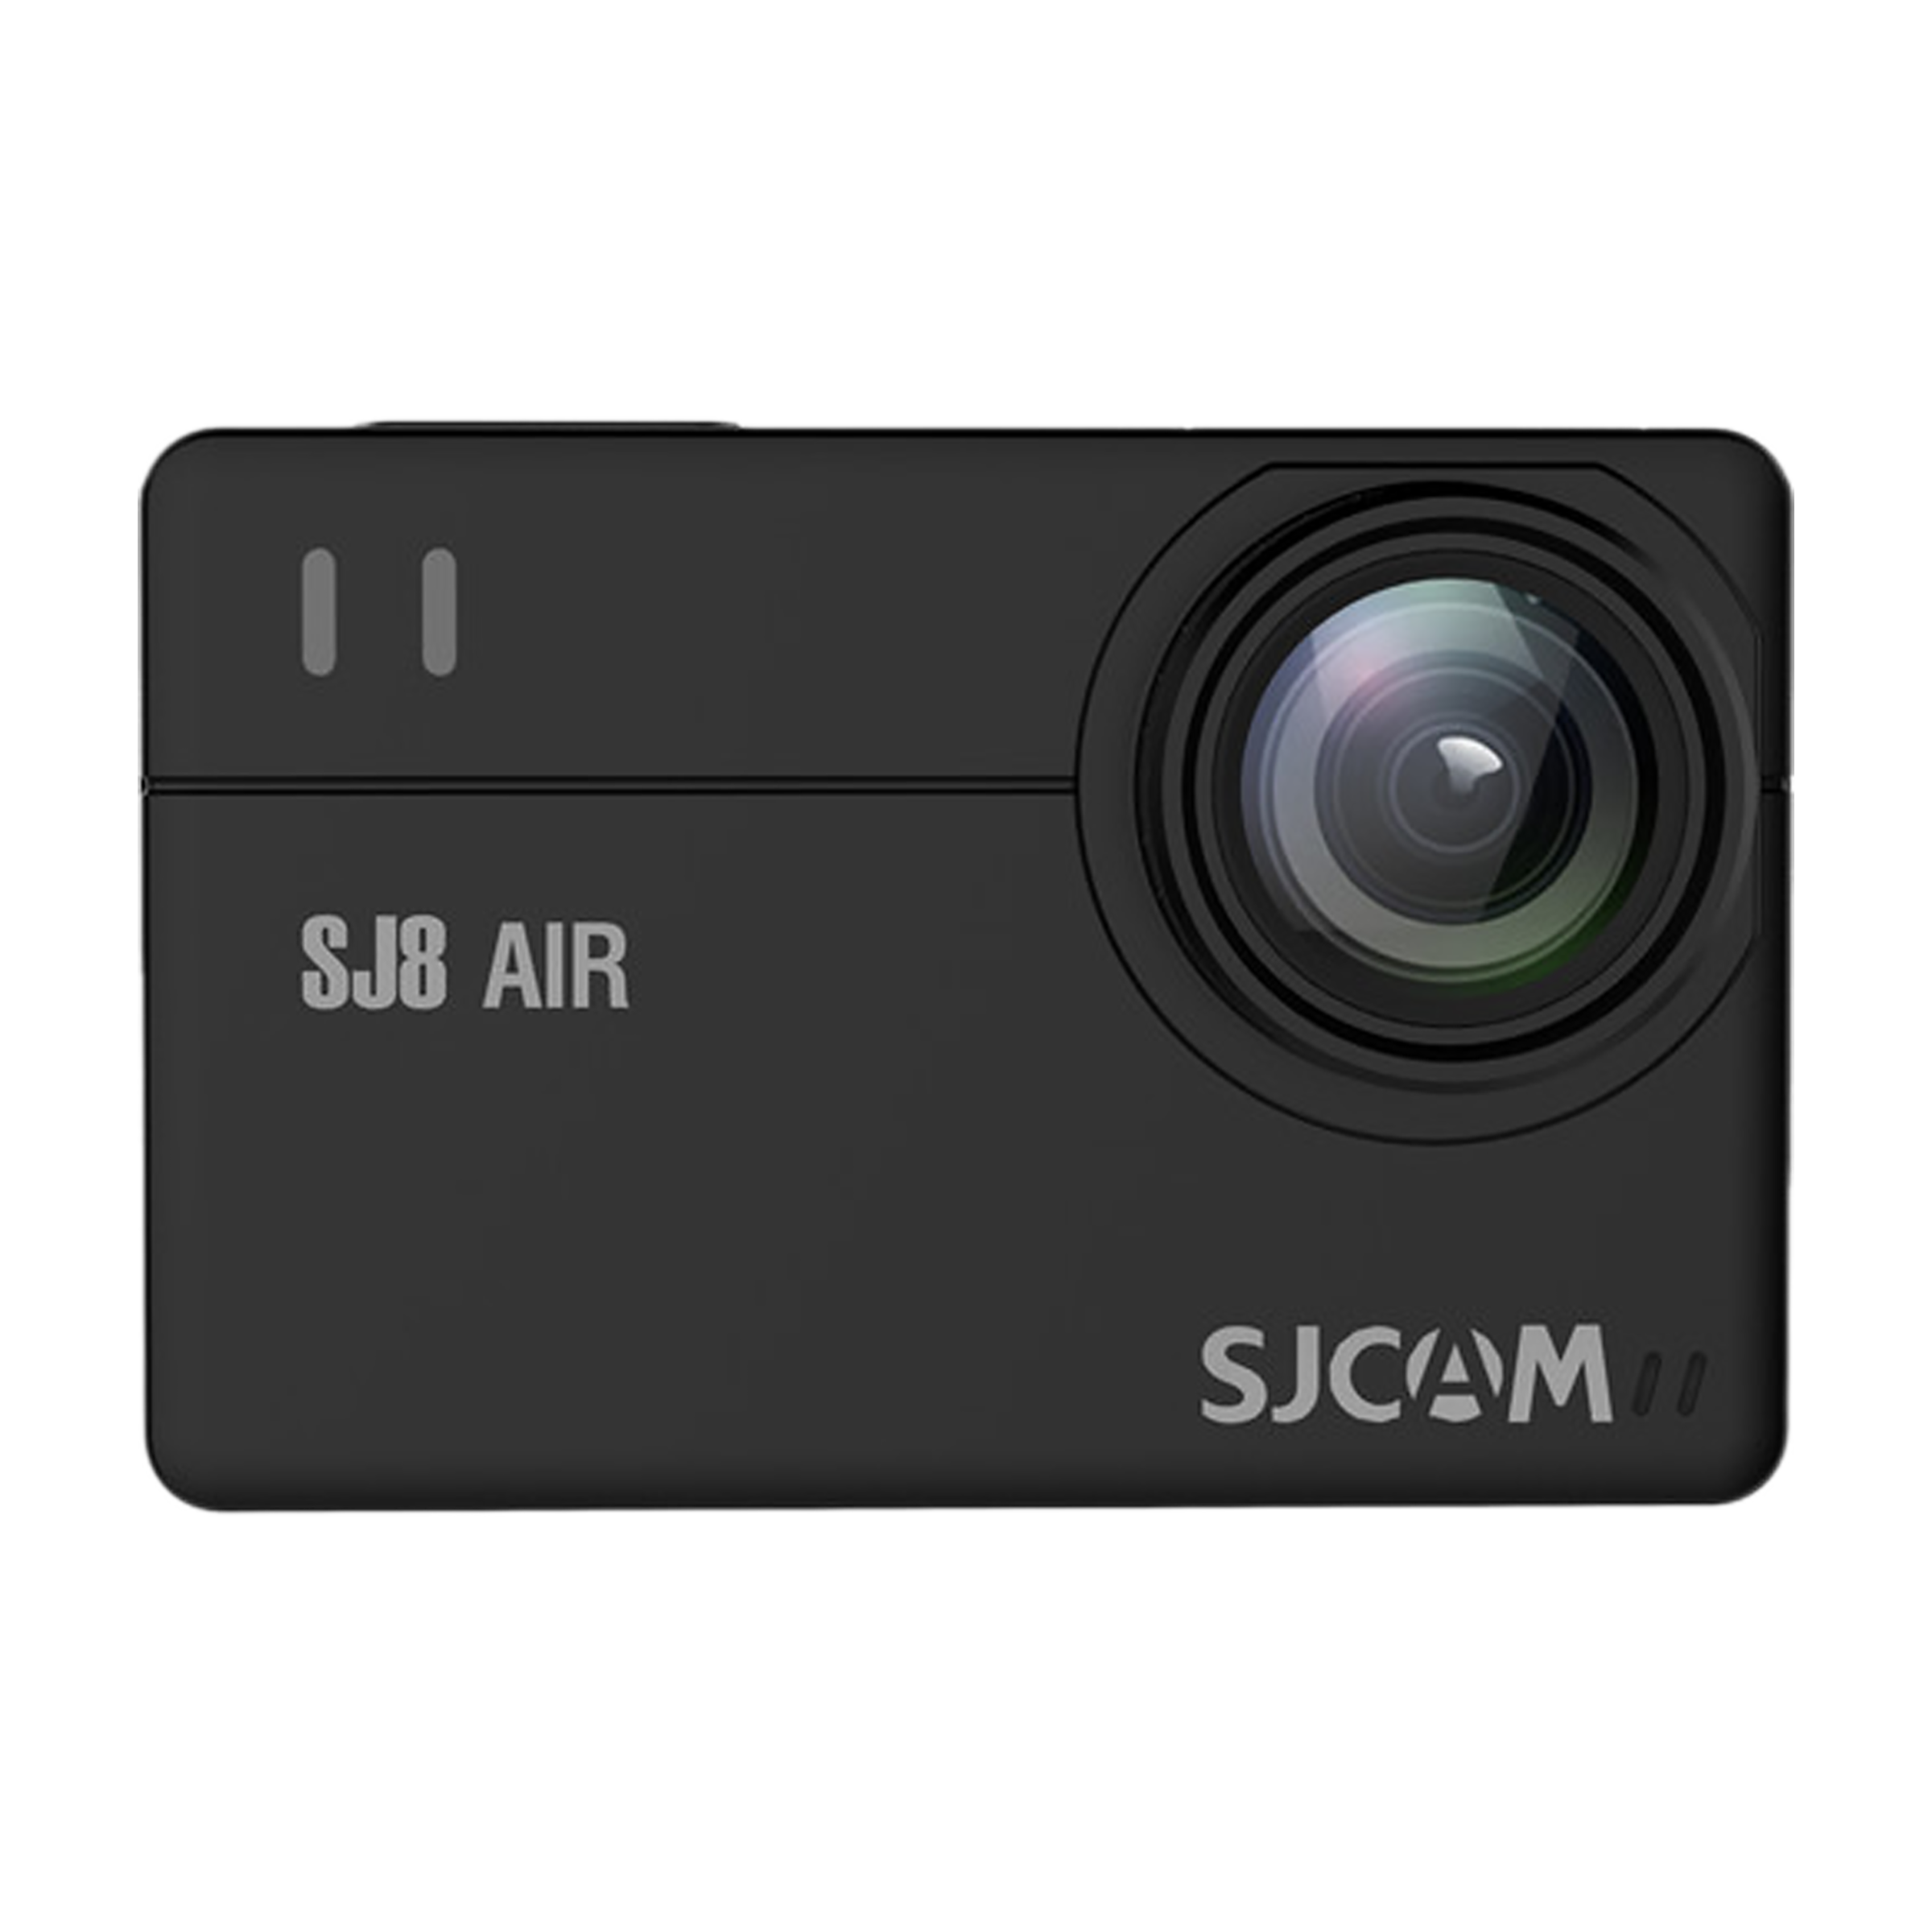 SJCAM SJ8 Air HD 1296P and 14.24MP 30 FPS Waterproof Action Camera with 160 Degree Wide Angle (Black)